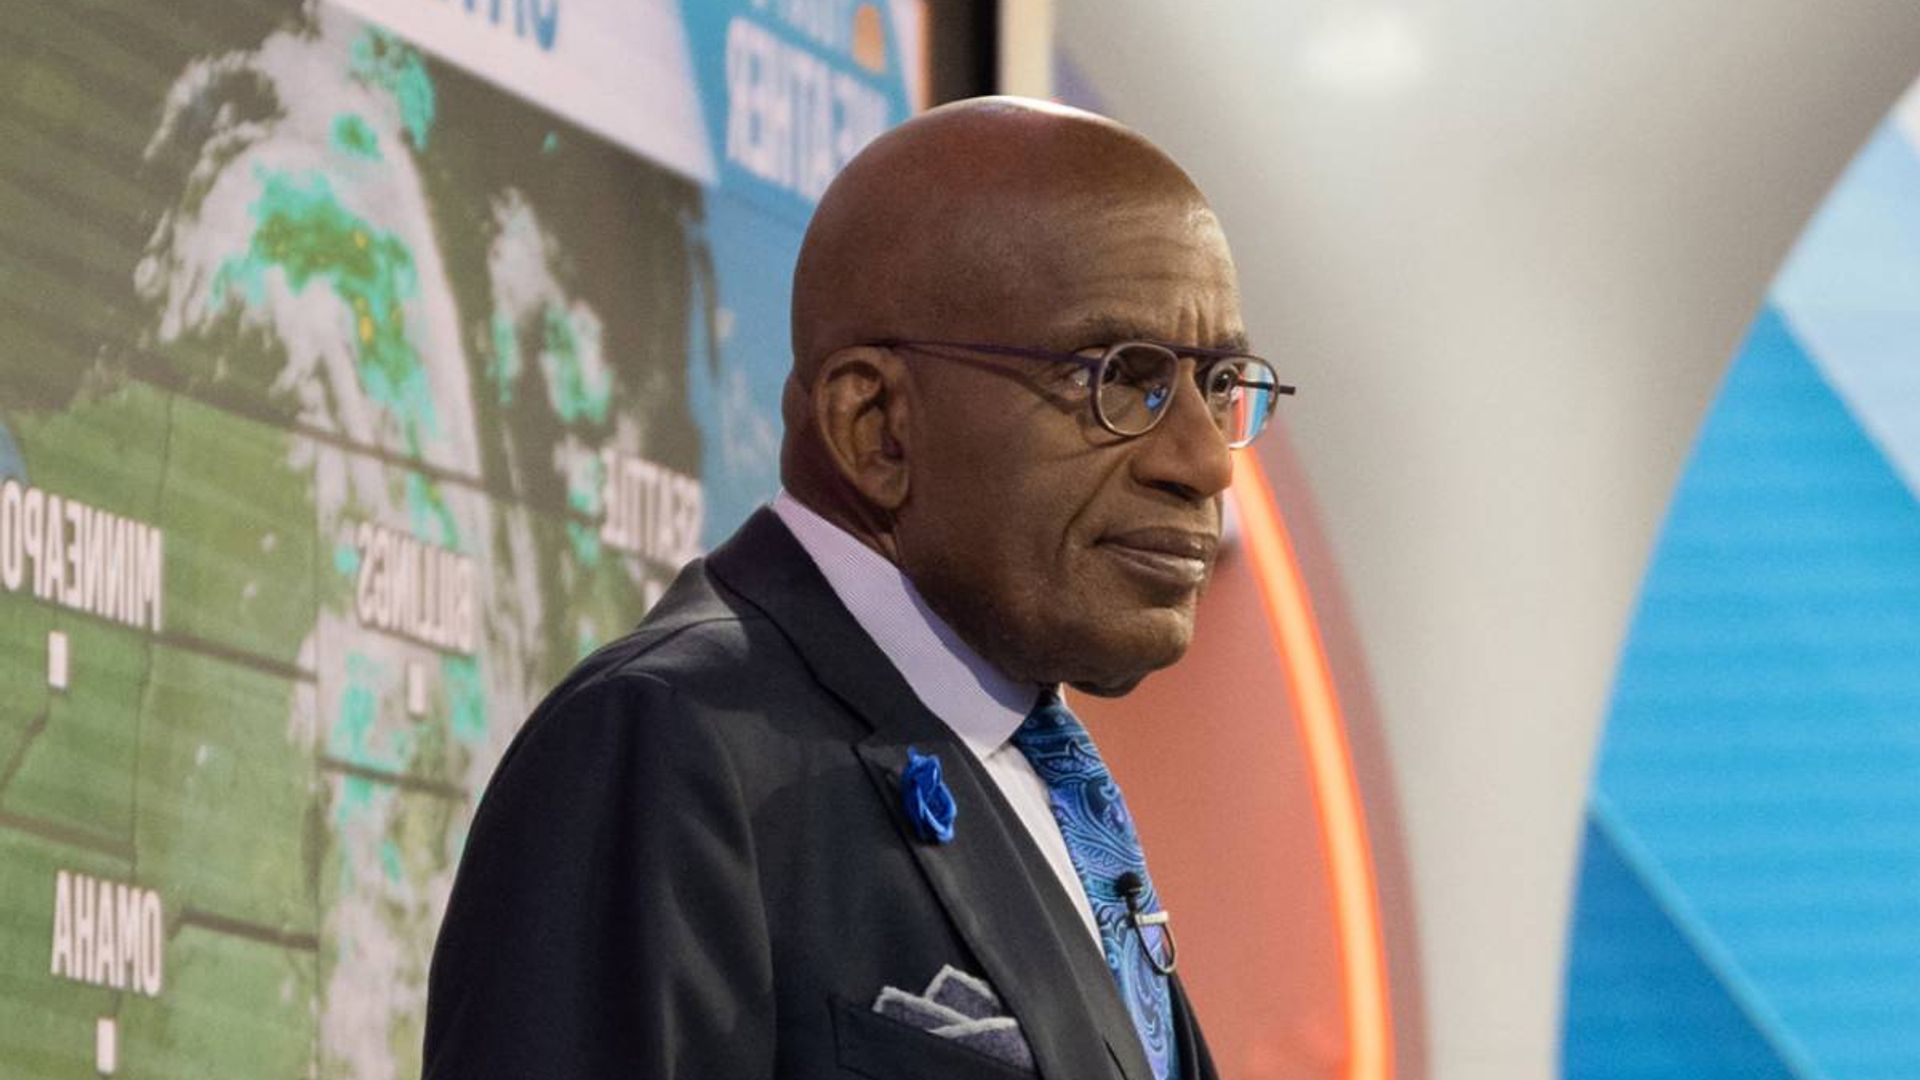 Today's Al Roker supported by costars as he shares latest health